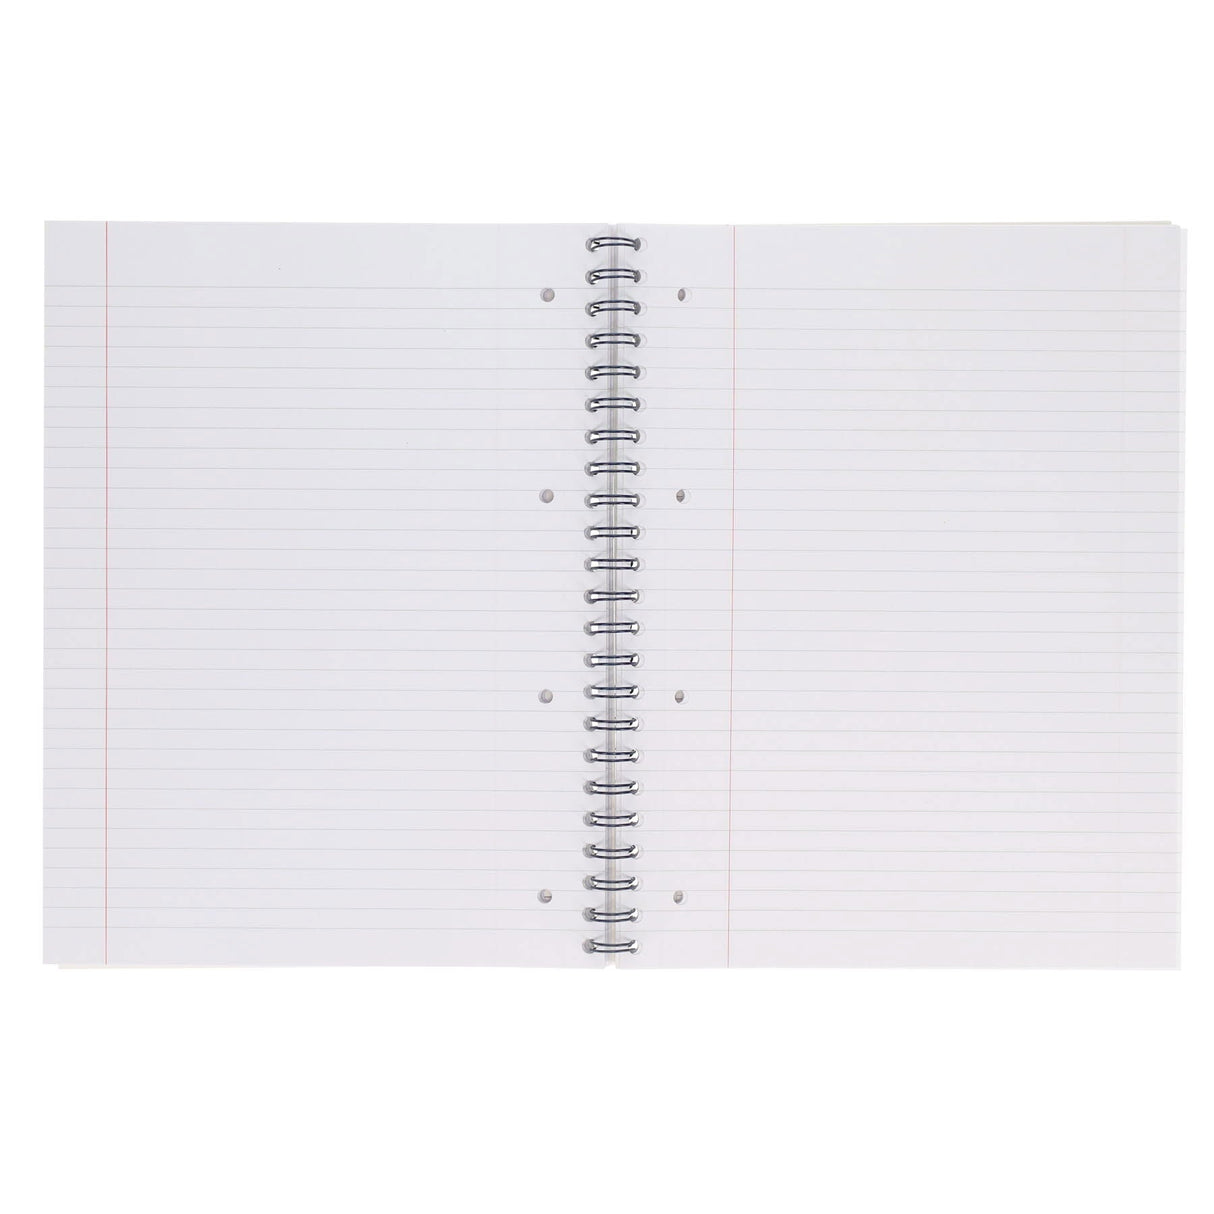 Premto A4 Wiro Notebook - 200 Pages - Grape Juice | Stationery Shop UK